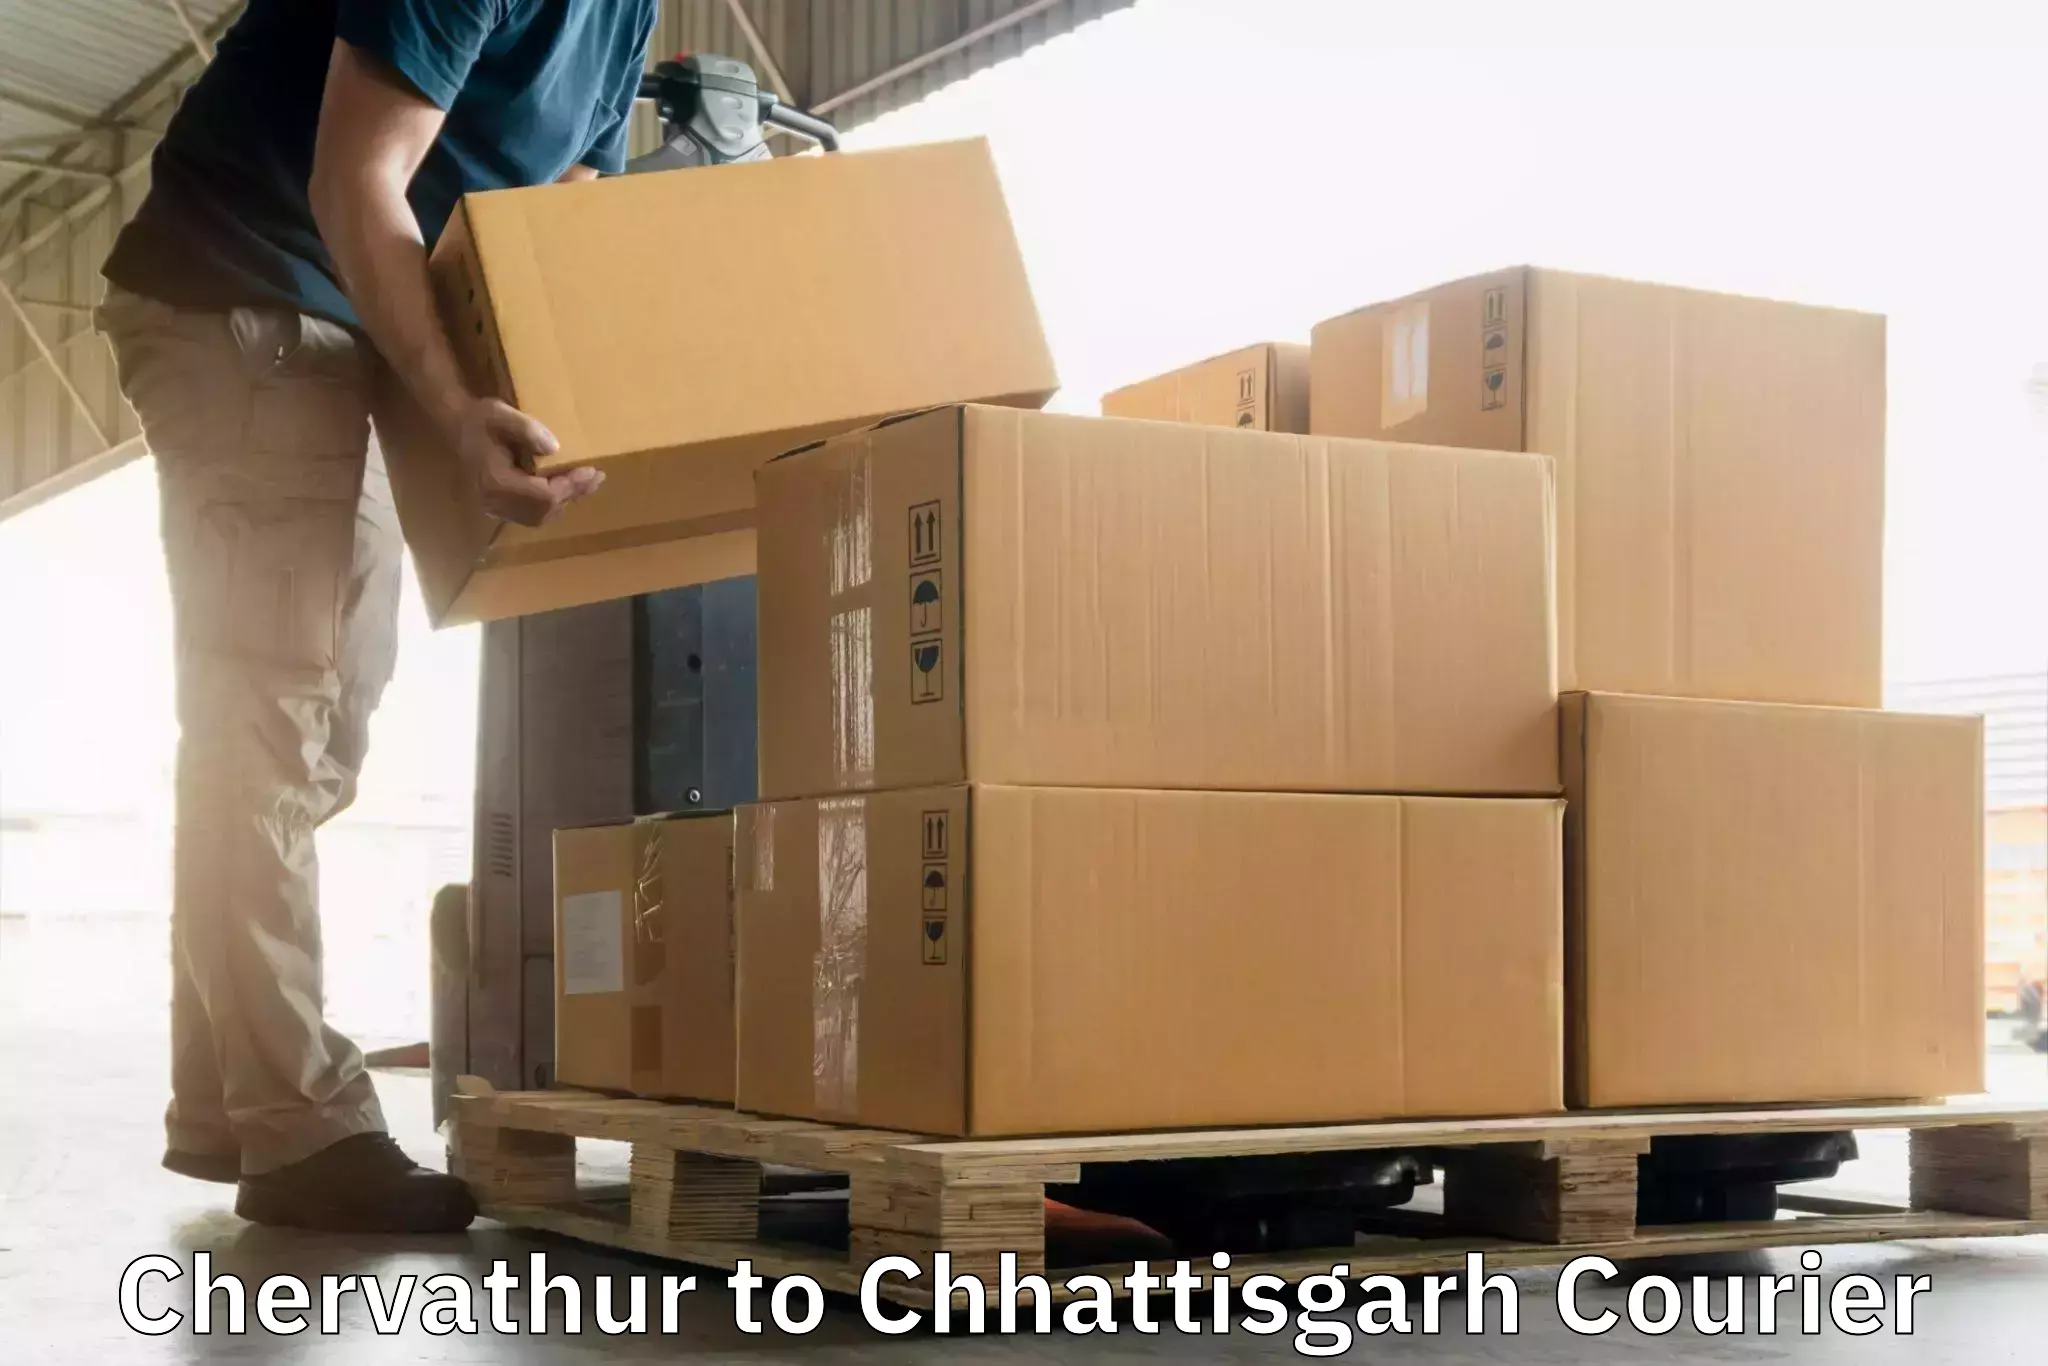 Same-day delivery solutions Chervathur to Mungeli